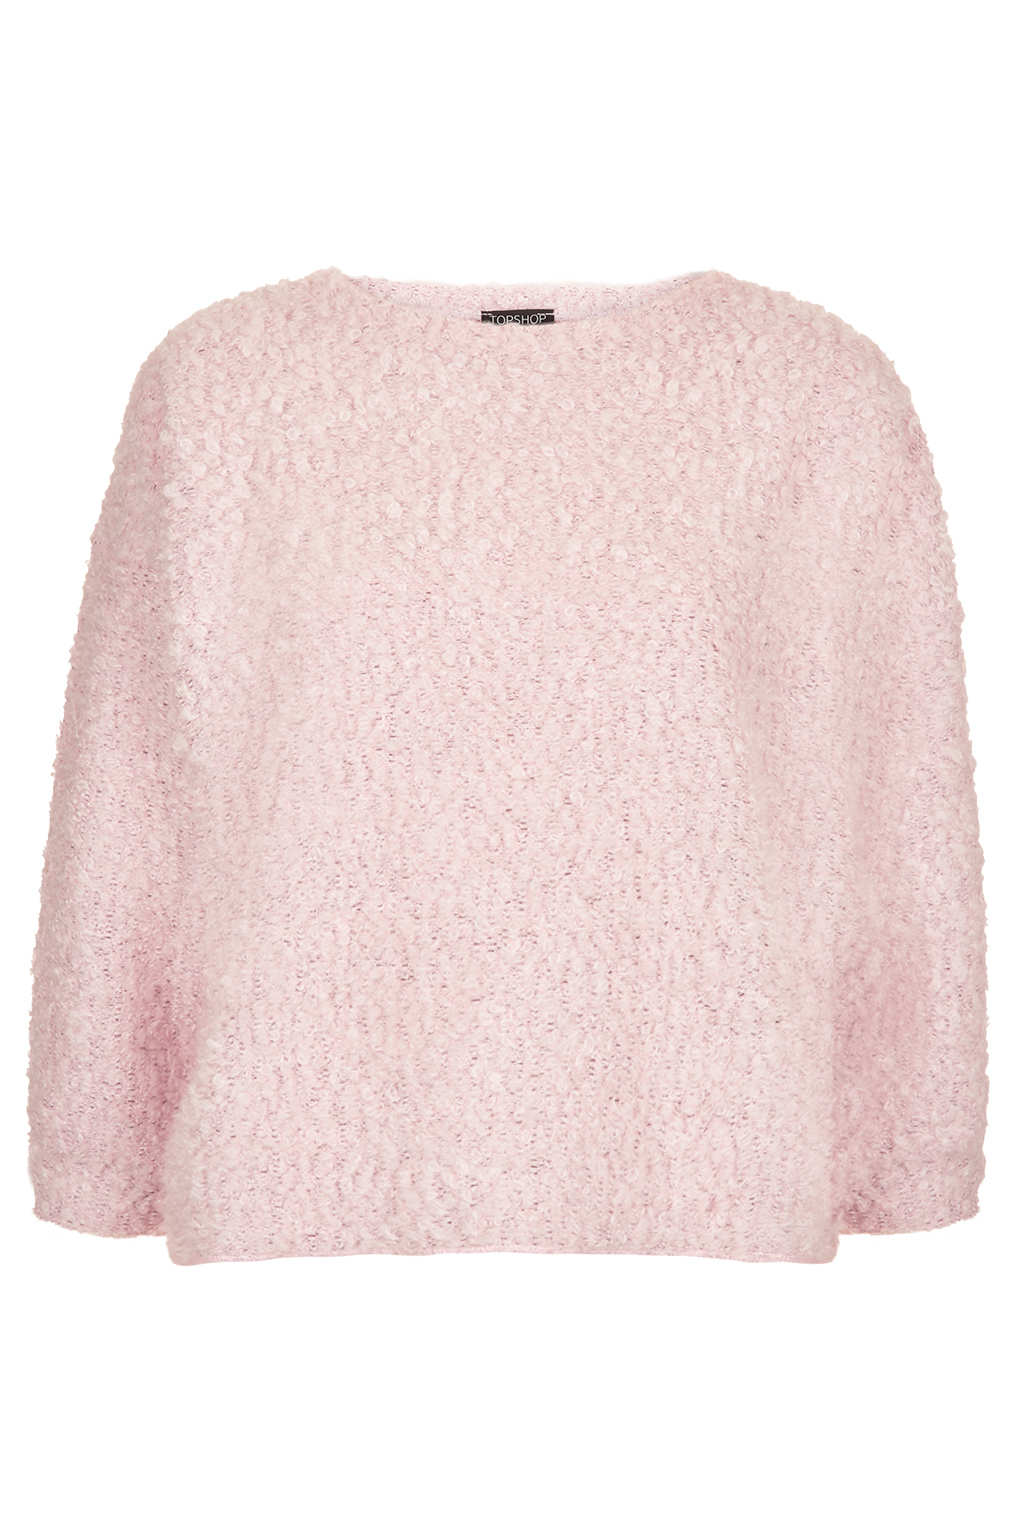 TOPSHOP Fluffy Sweat in Pink - Lyst